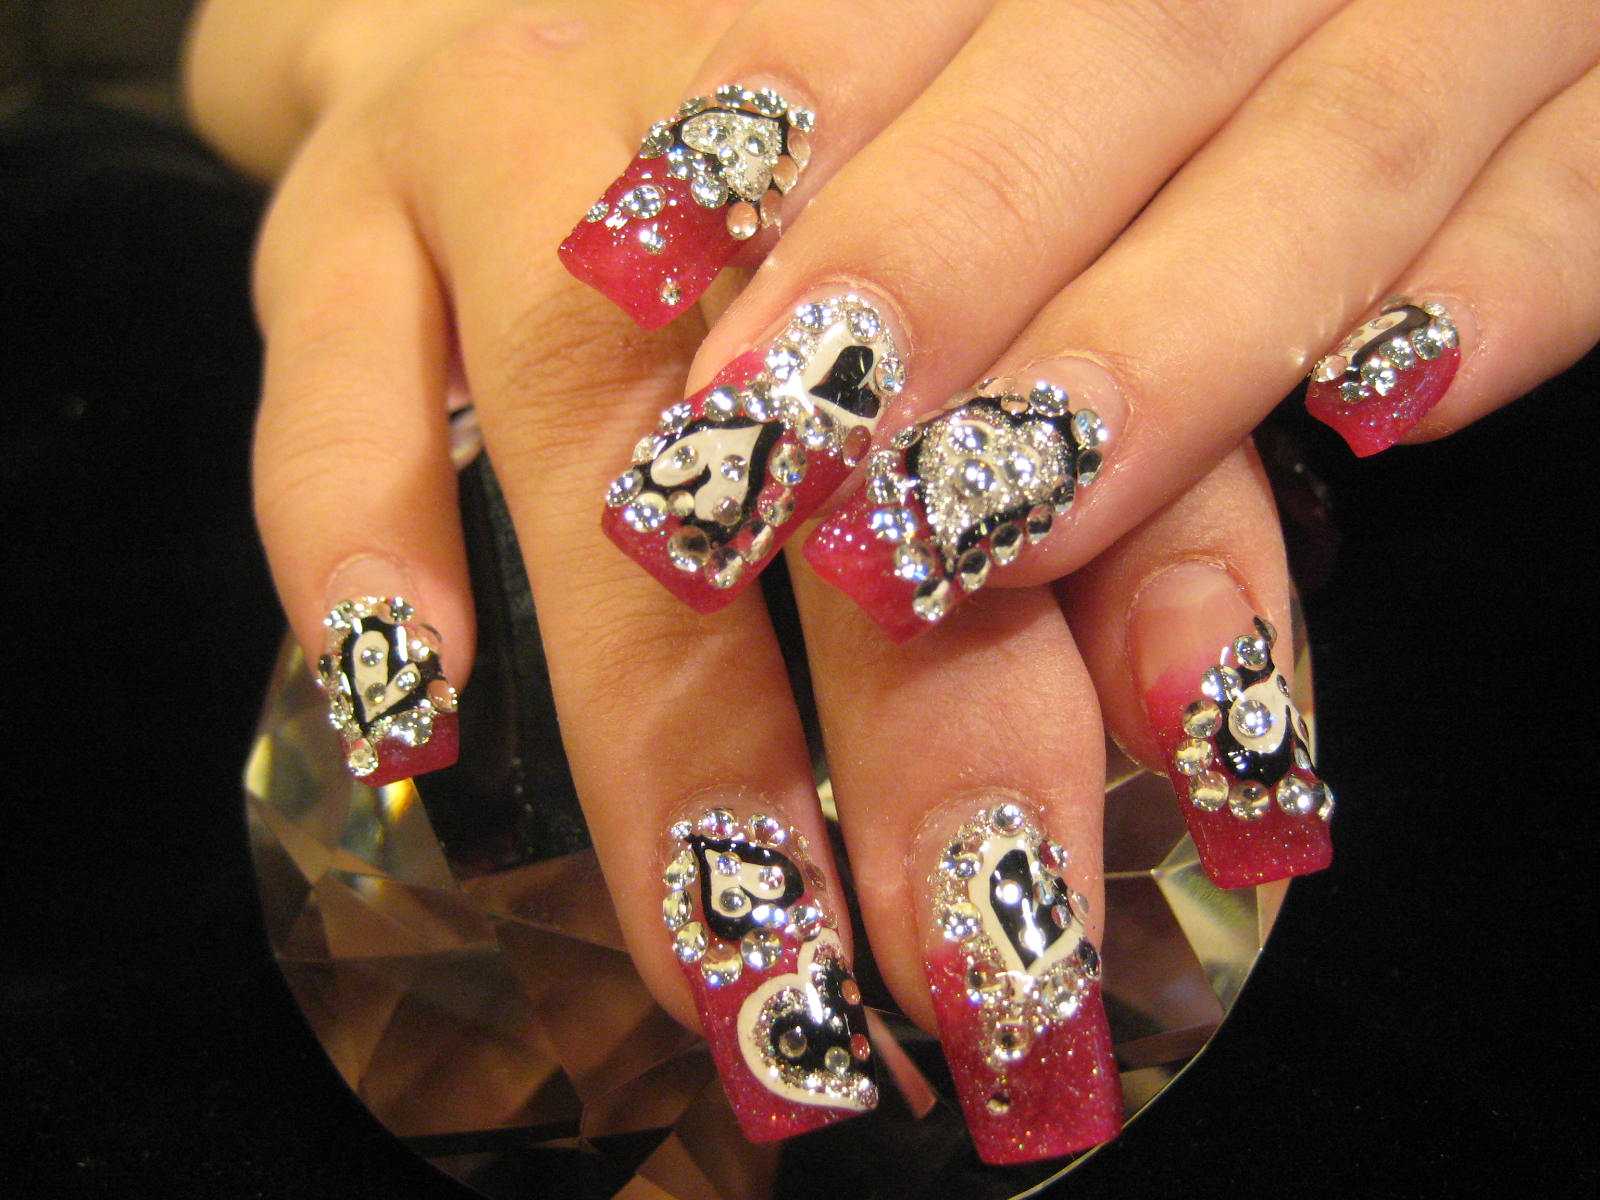 6. Bedazzled Nail Art - wide 7